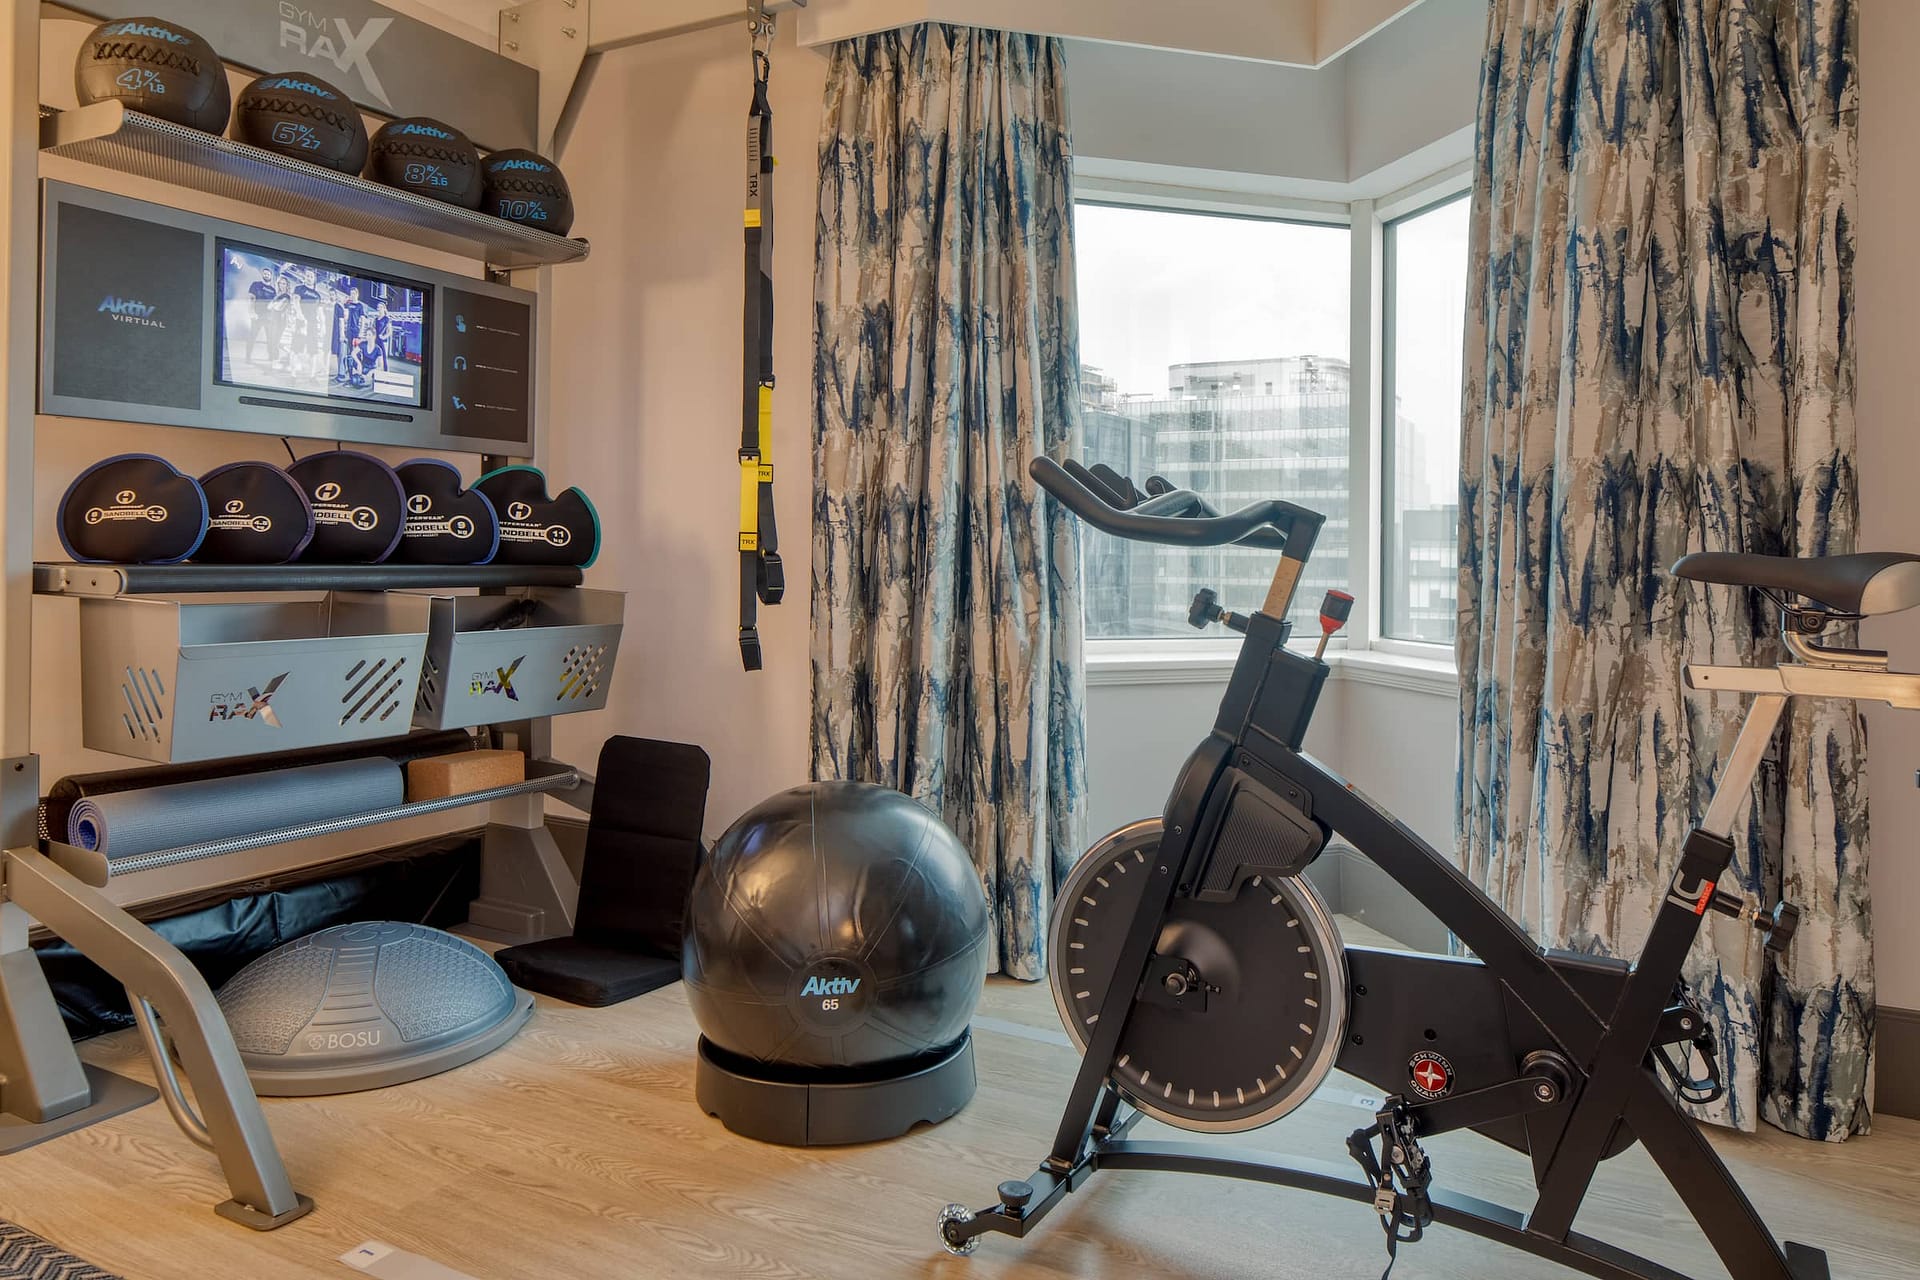 Hilton Fitness Systems